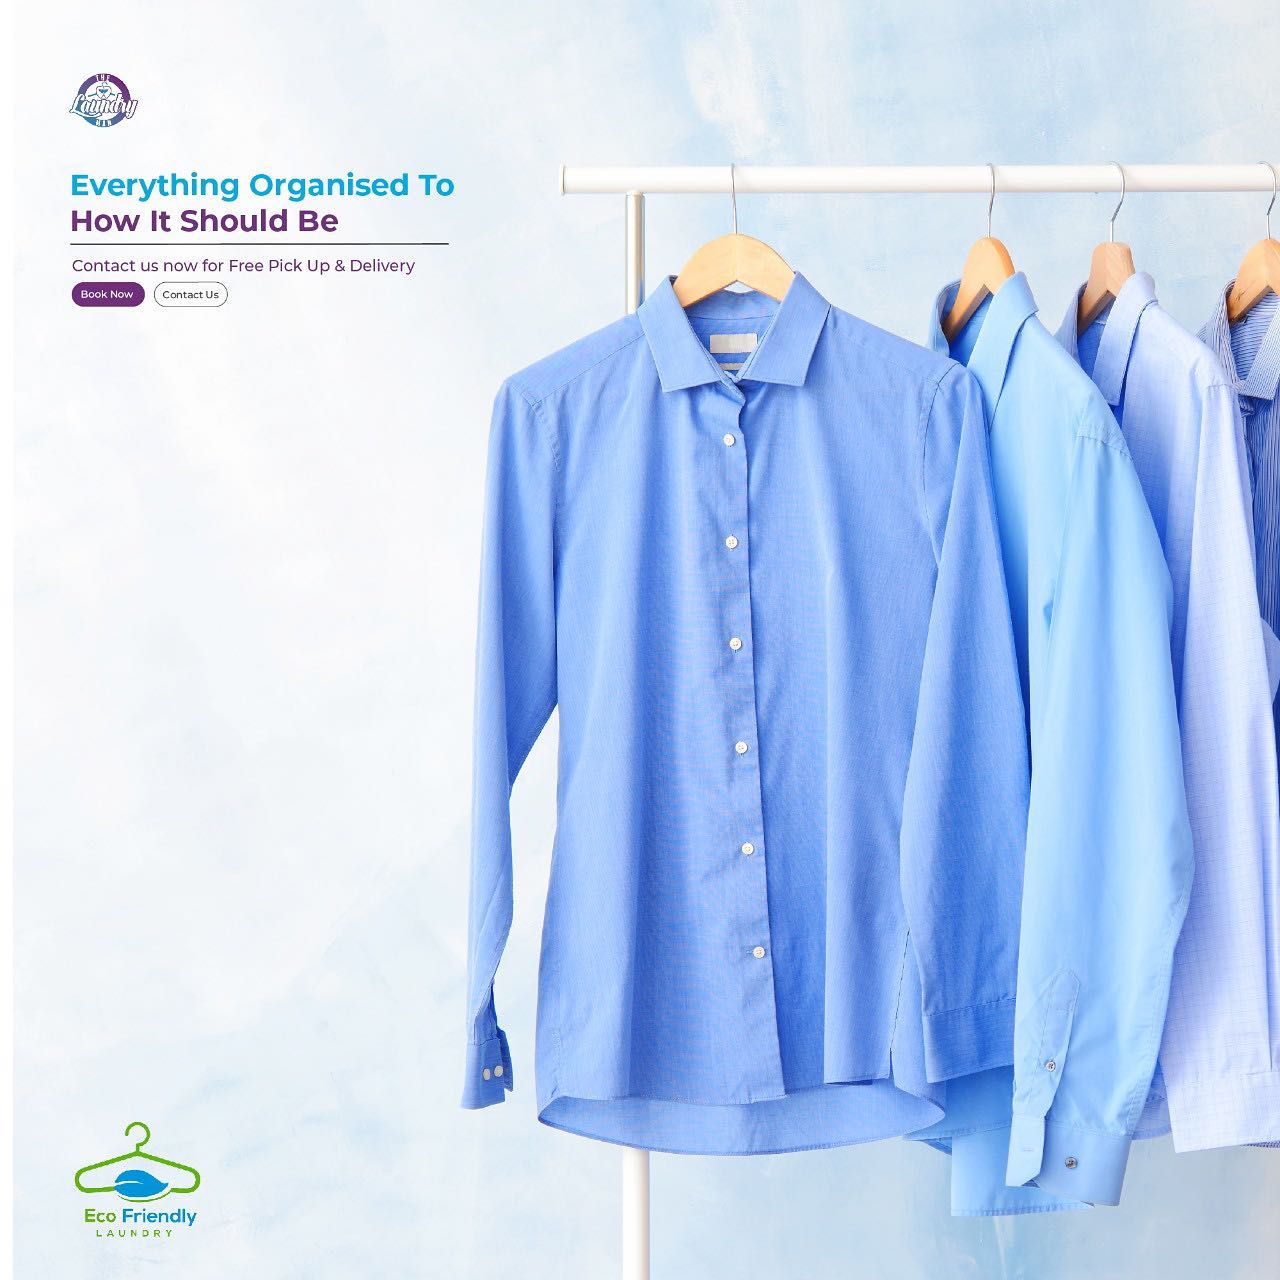 DRY CLEANING Manchester